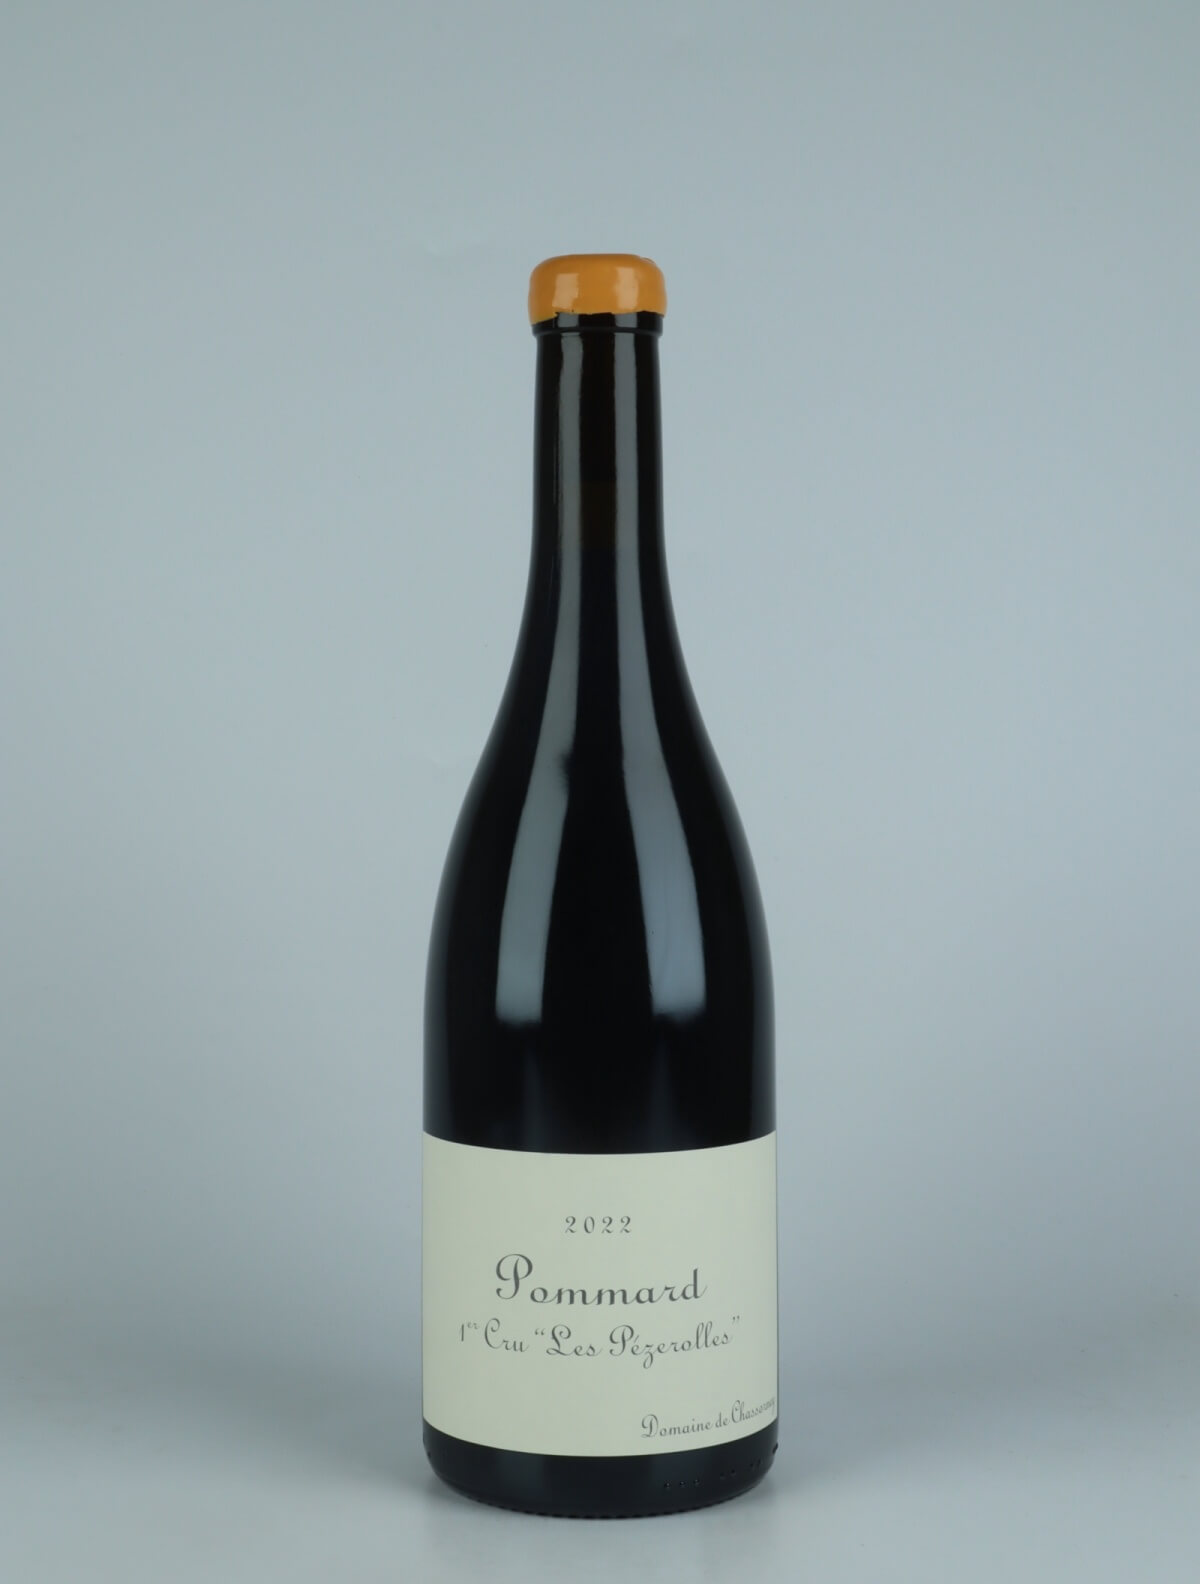 A bottle 2022 Pommard 1. Cru - Les Pezzerolles Red wine from Domaine de Chassorney, Burgundy in France